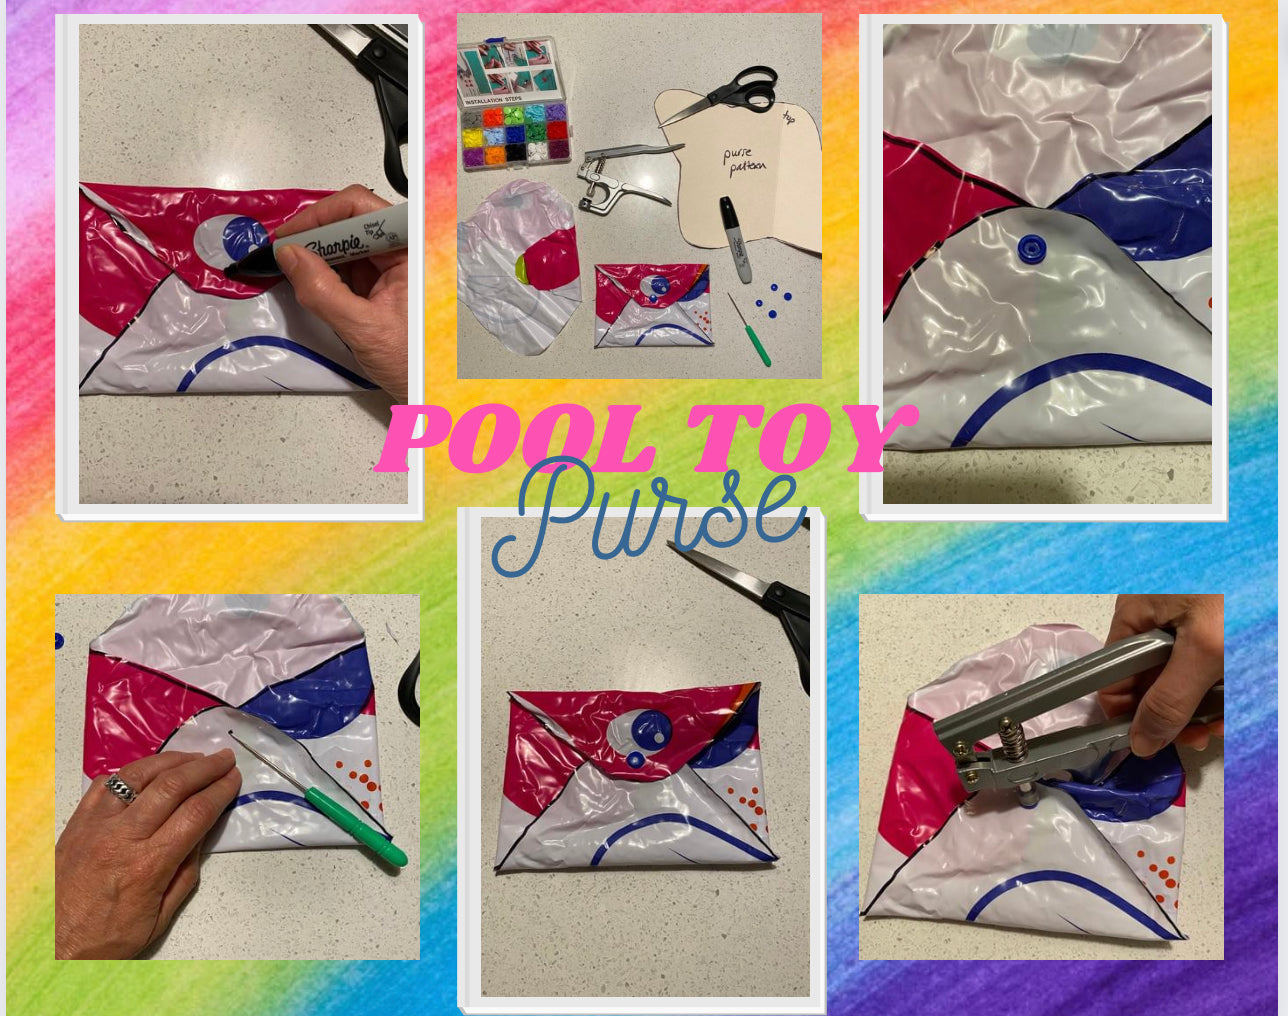 Activity Instruction Craft Sheet - Making a Purse from Pool Inflatables Recycling Plastics